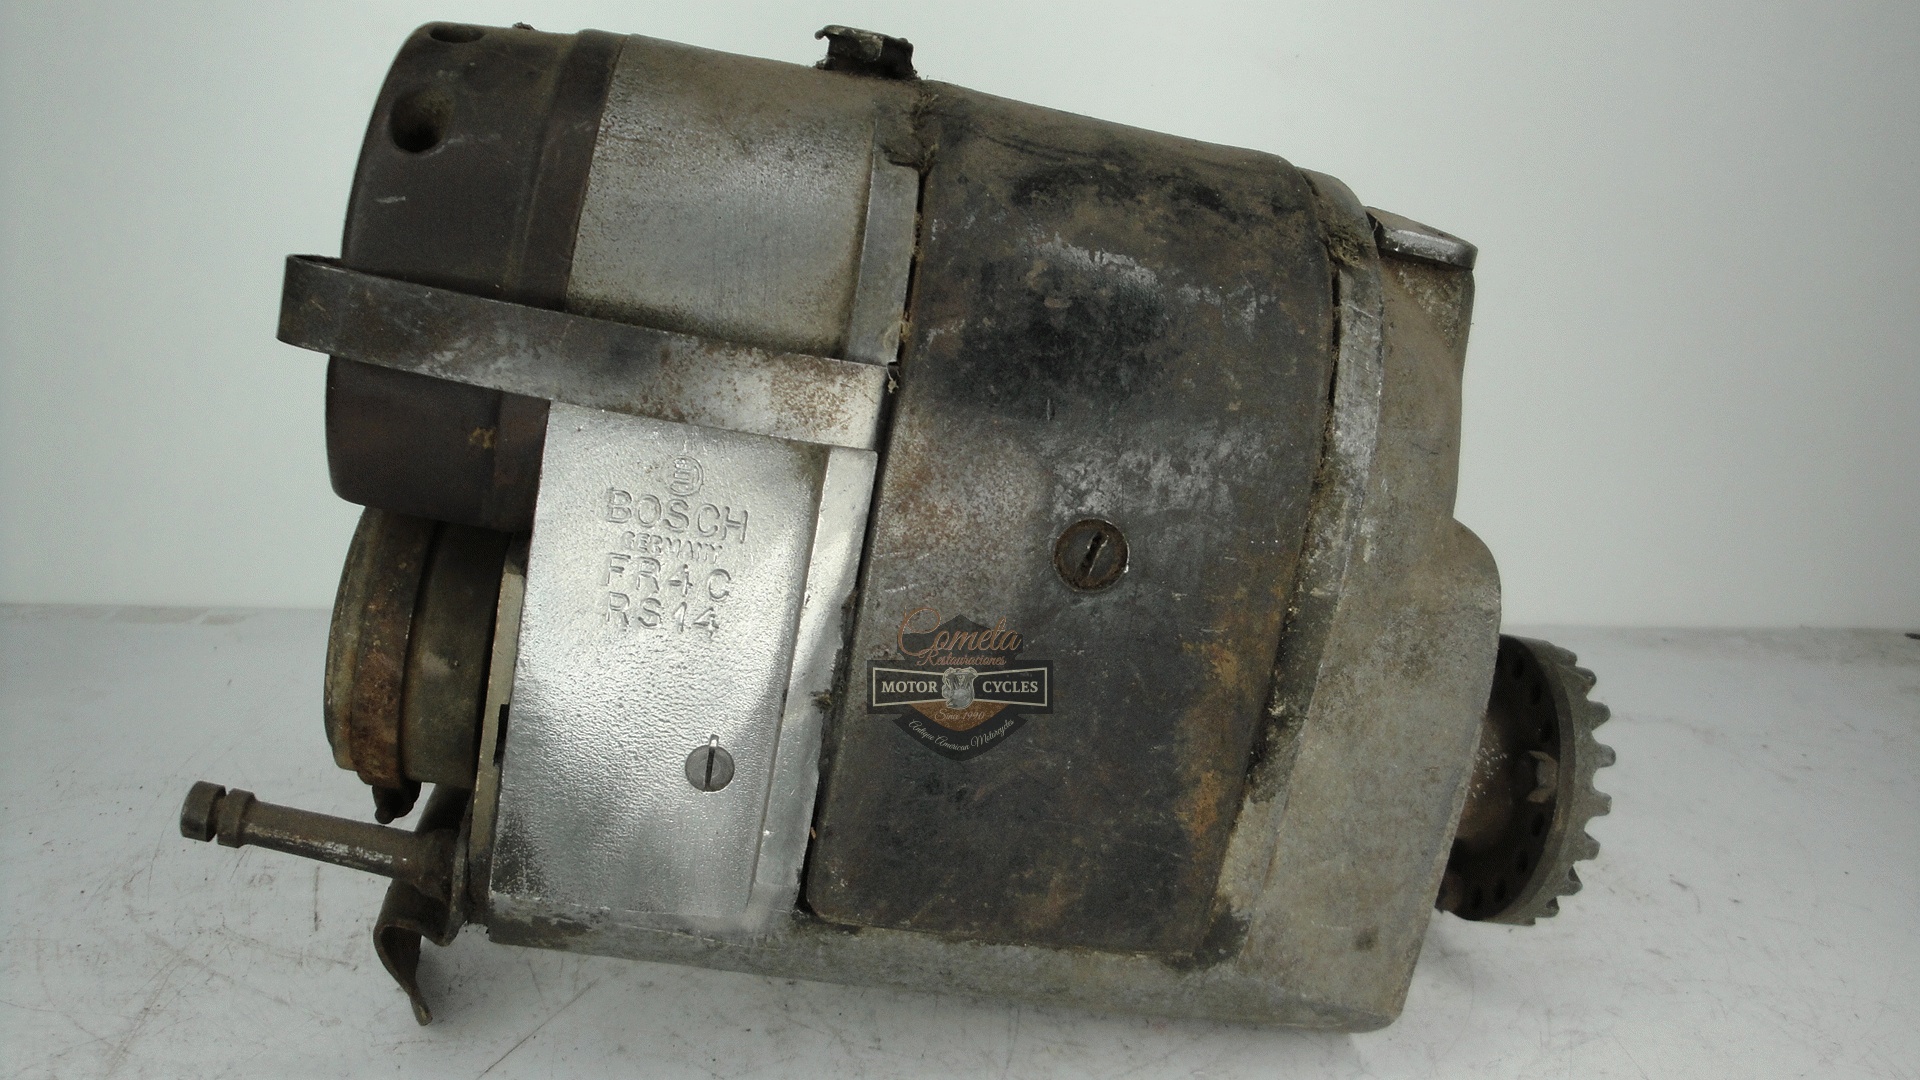 MAGNETO BOSCH TYPE FR4C RS14 COCHE / TRACTOR / CAMION  AÑOS  1920 A 1930 !